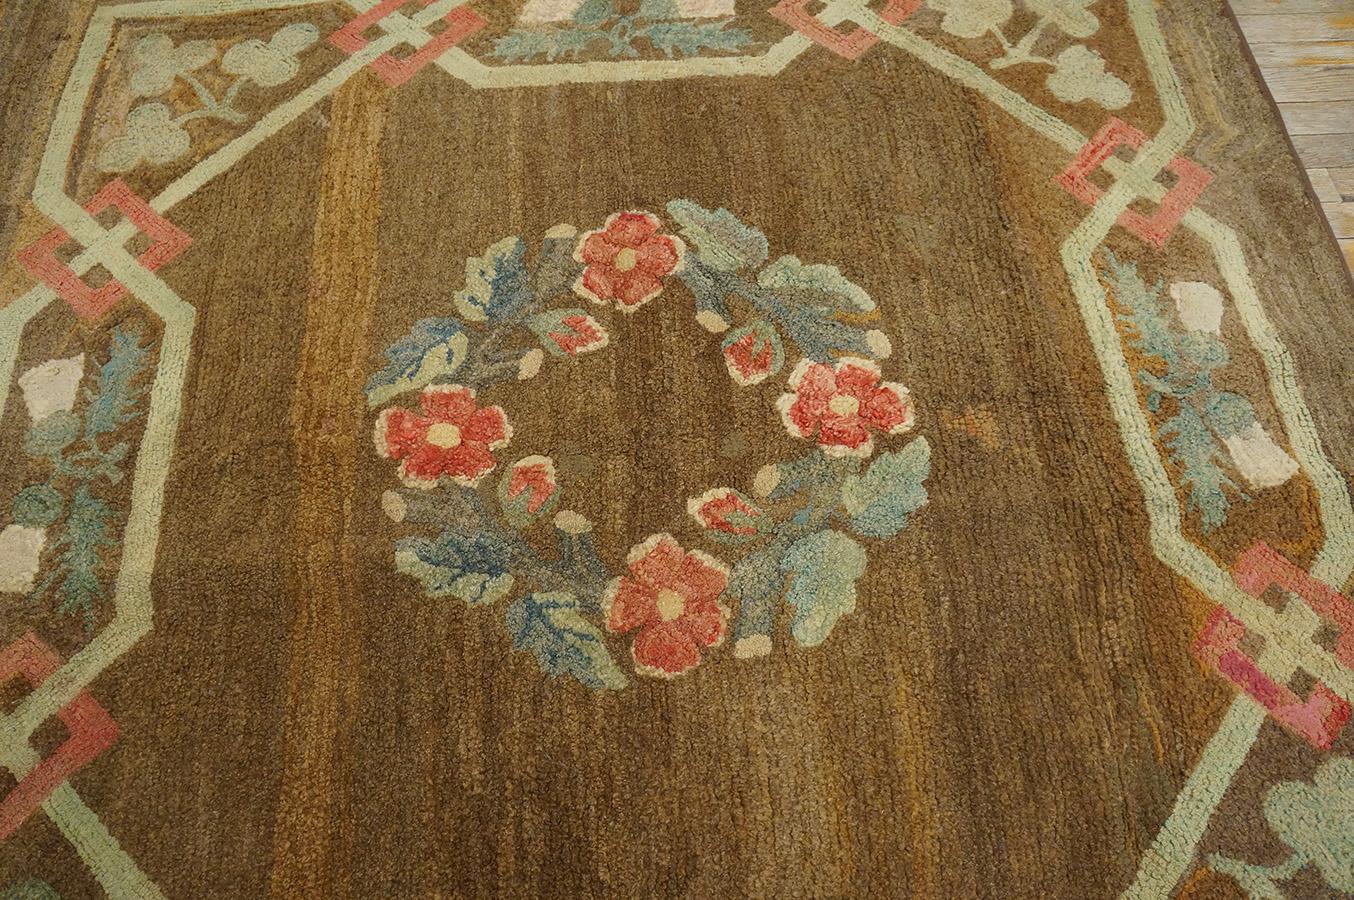 Early 20th Century American Hooked Rug ( 5' 9''x5' 10'' - 175 x 177 cm ) For Sale 4